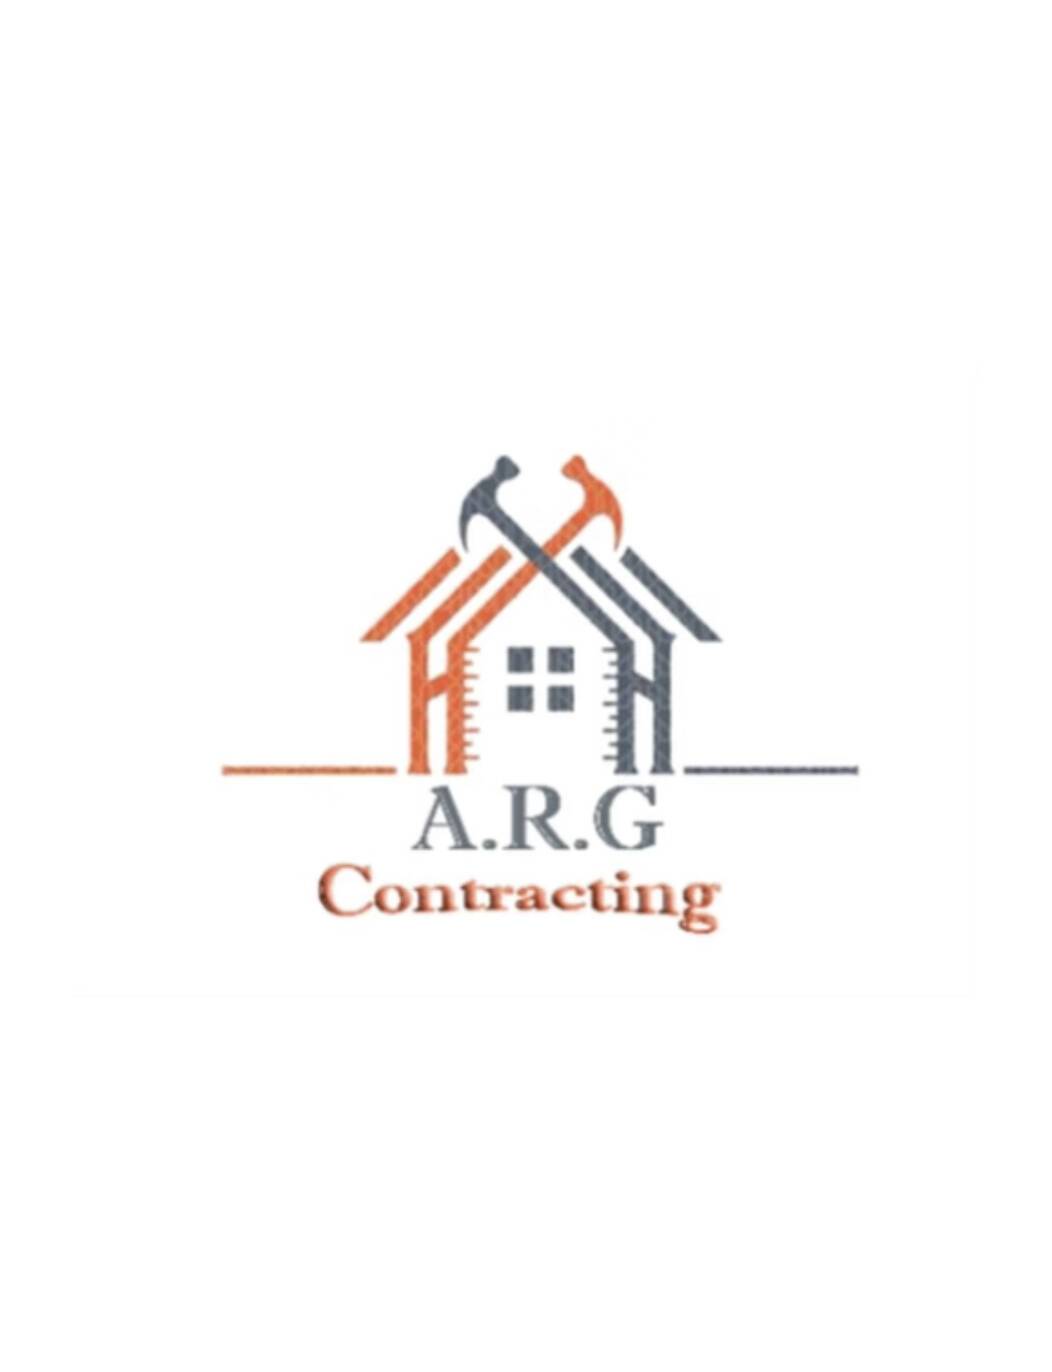 A.R.G. Contracting